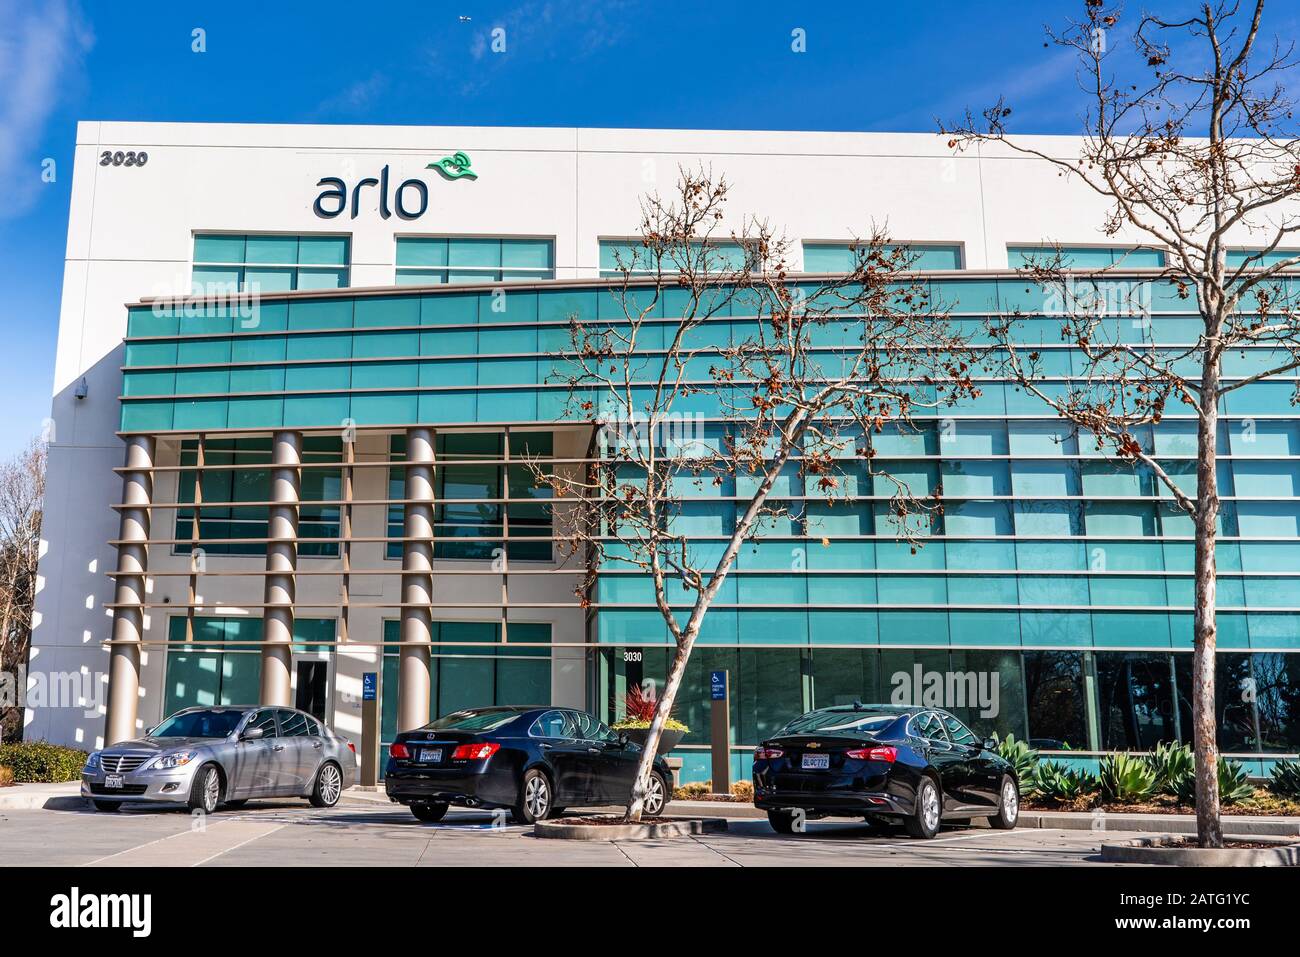 Jan 31, 2020 San Jose / CA / USA - Arlo Technologies headquarters in Silicon Valley; Arlo Technologies, Inc is a home automation company, which makes Stock Photo